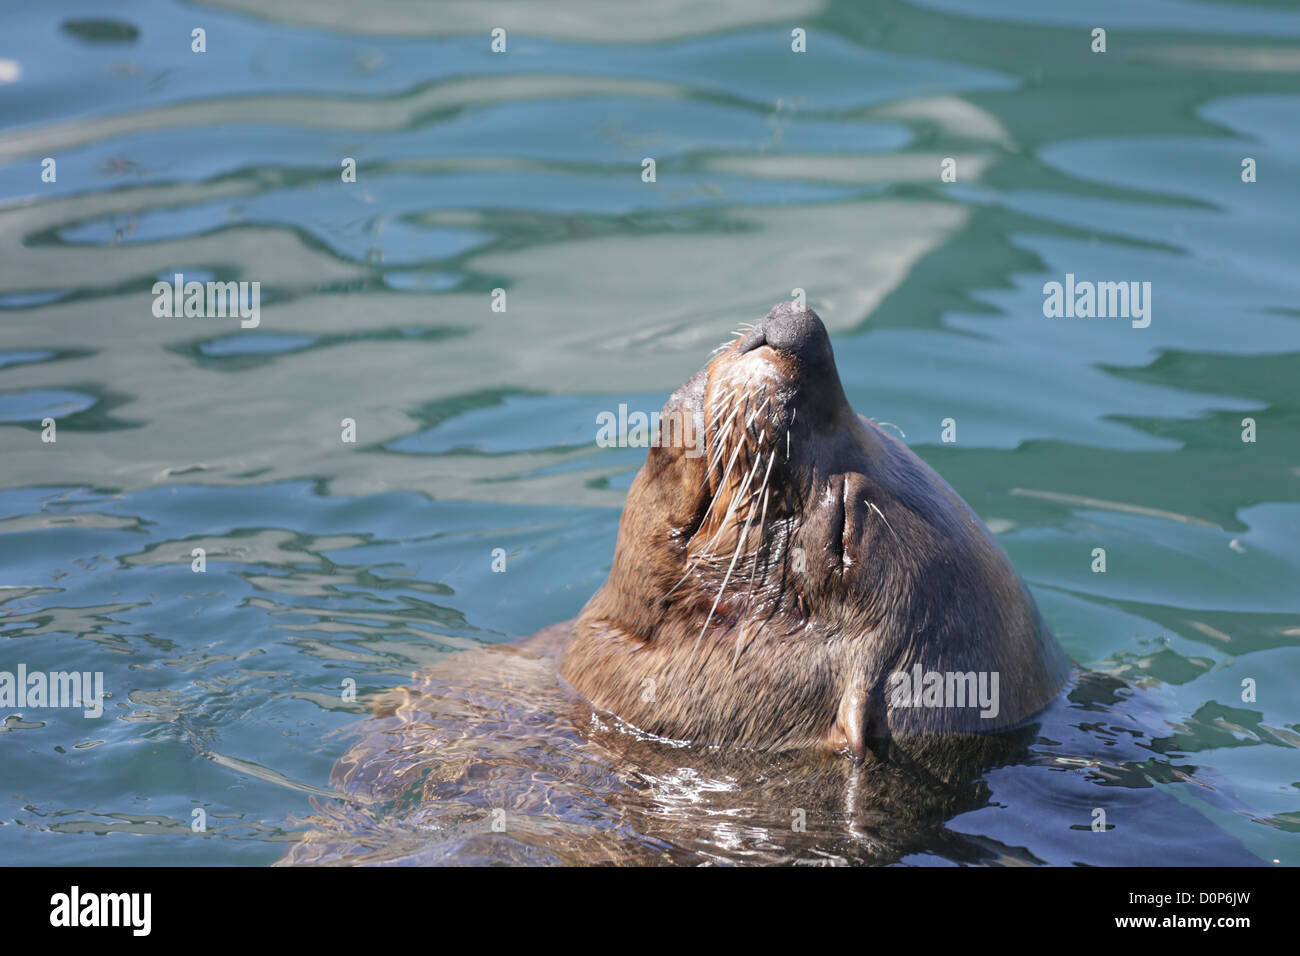 A sleepy seal sticking its head out of the water and enjoying the warm sun with its eyes closed Stock Photo